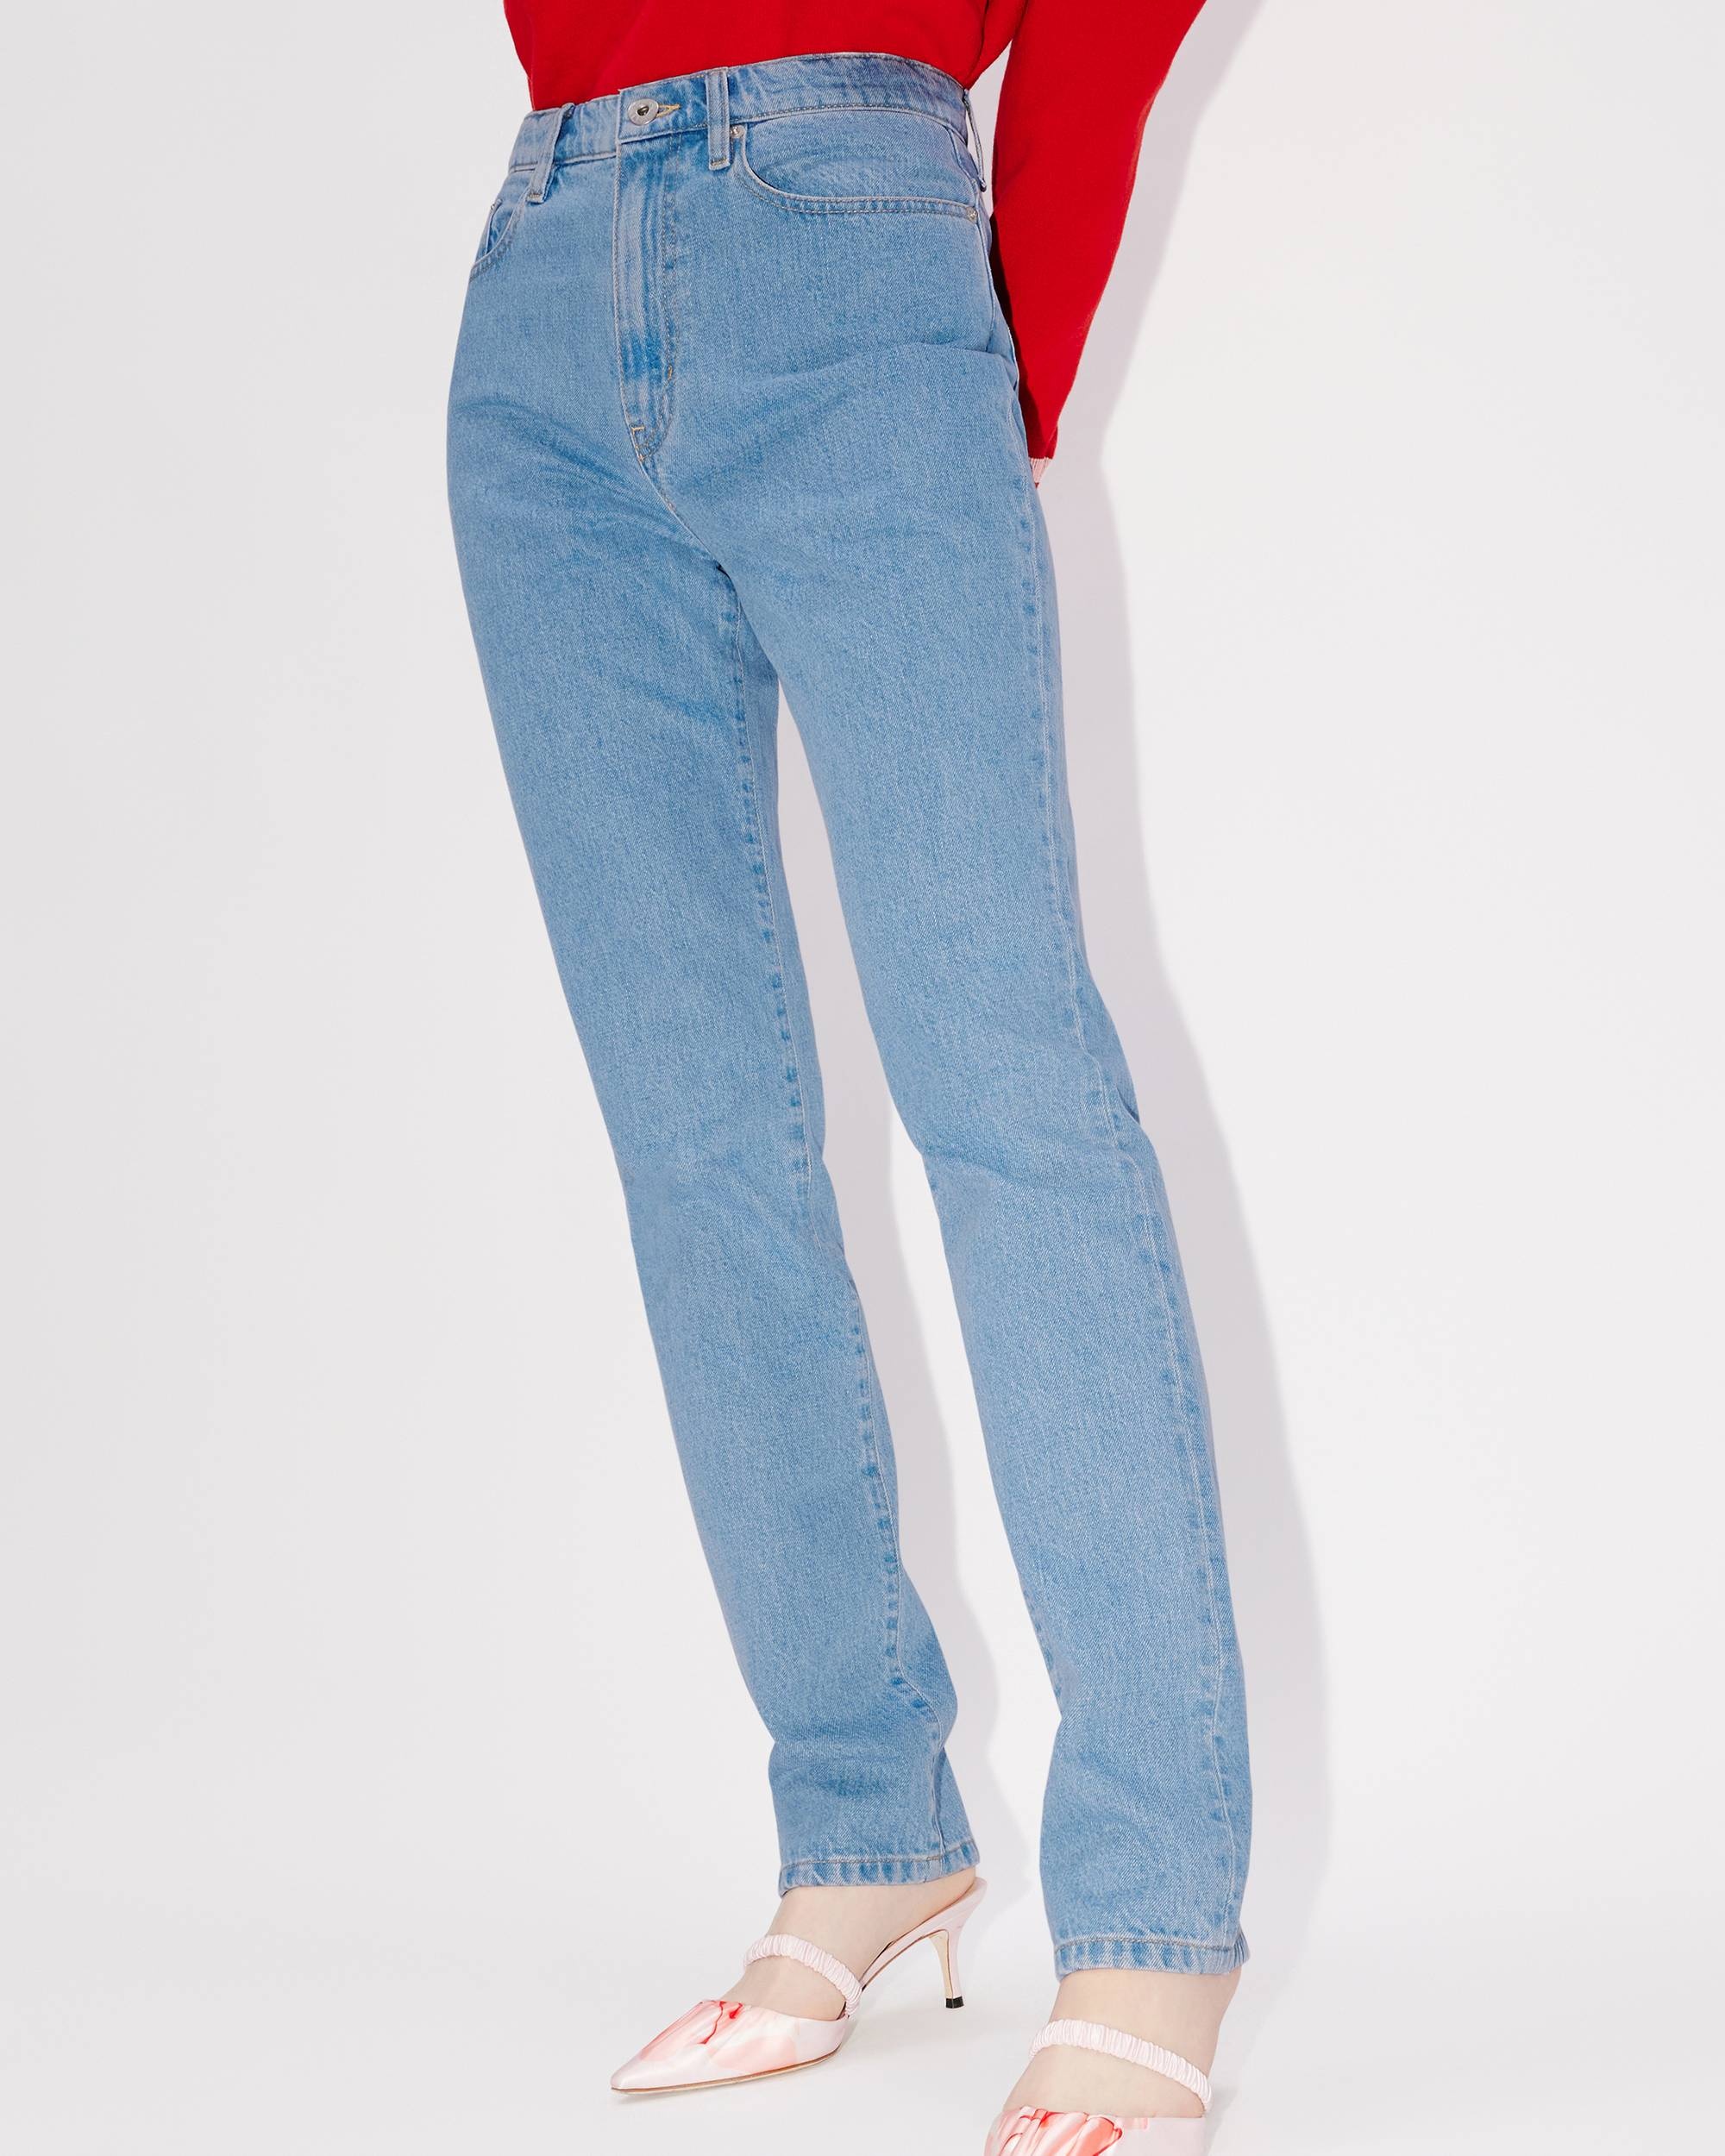 'Year of the Dragon' cropped embroidered ASAGAO jeans - 8